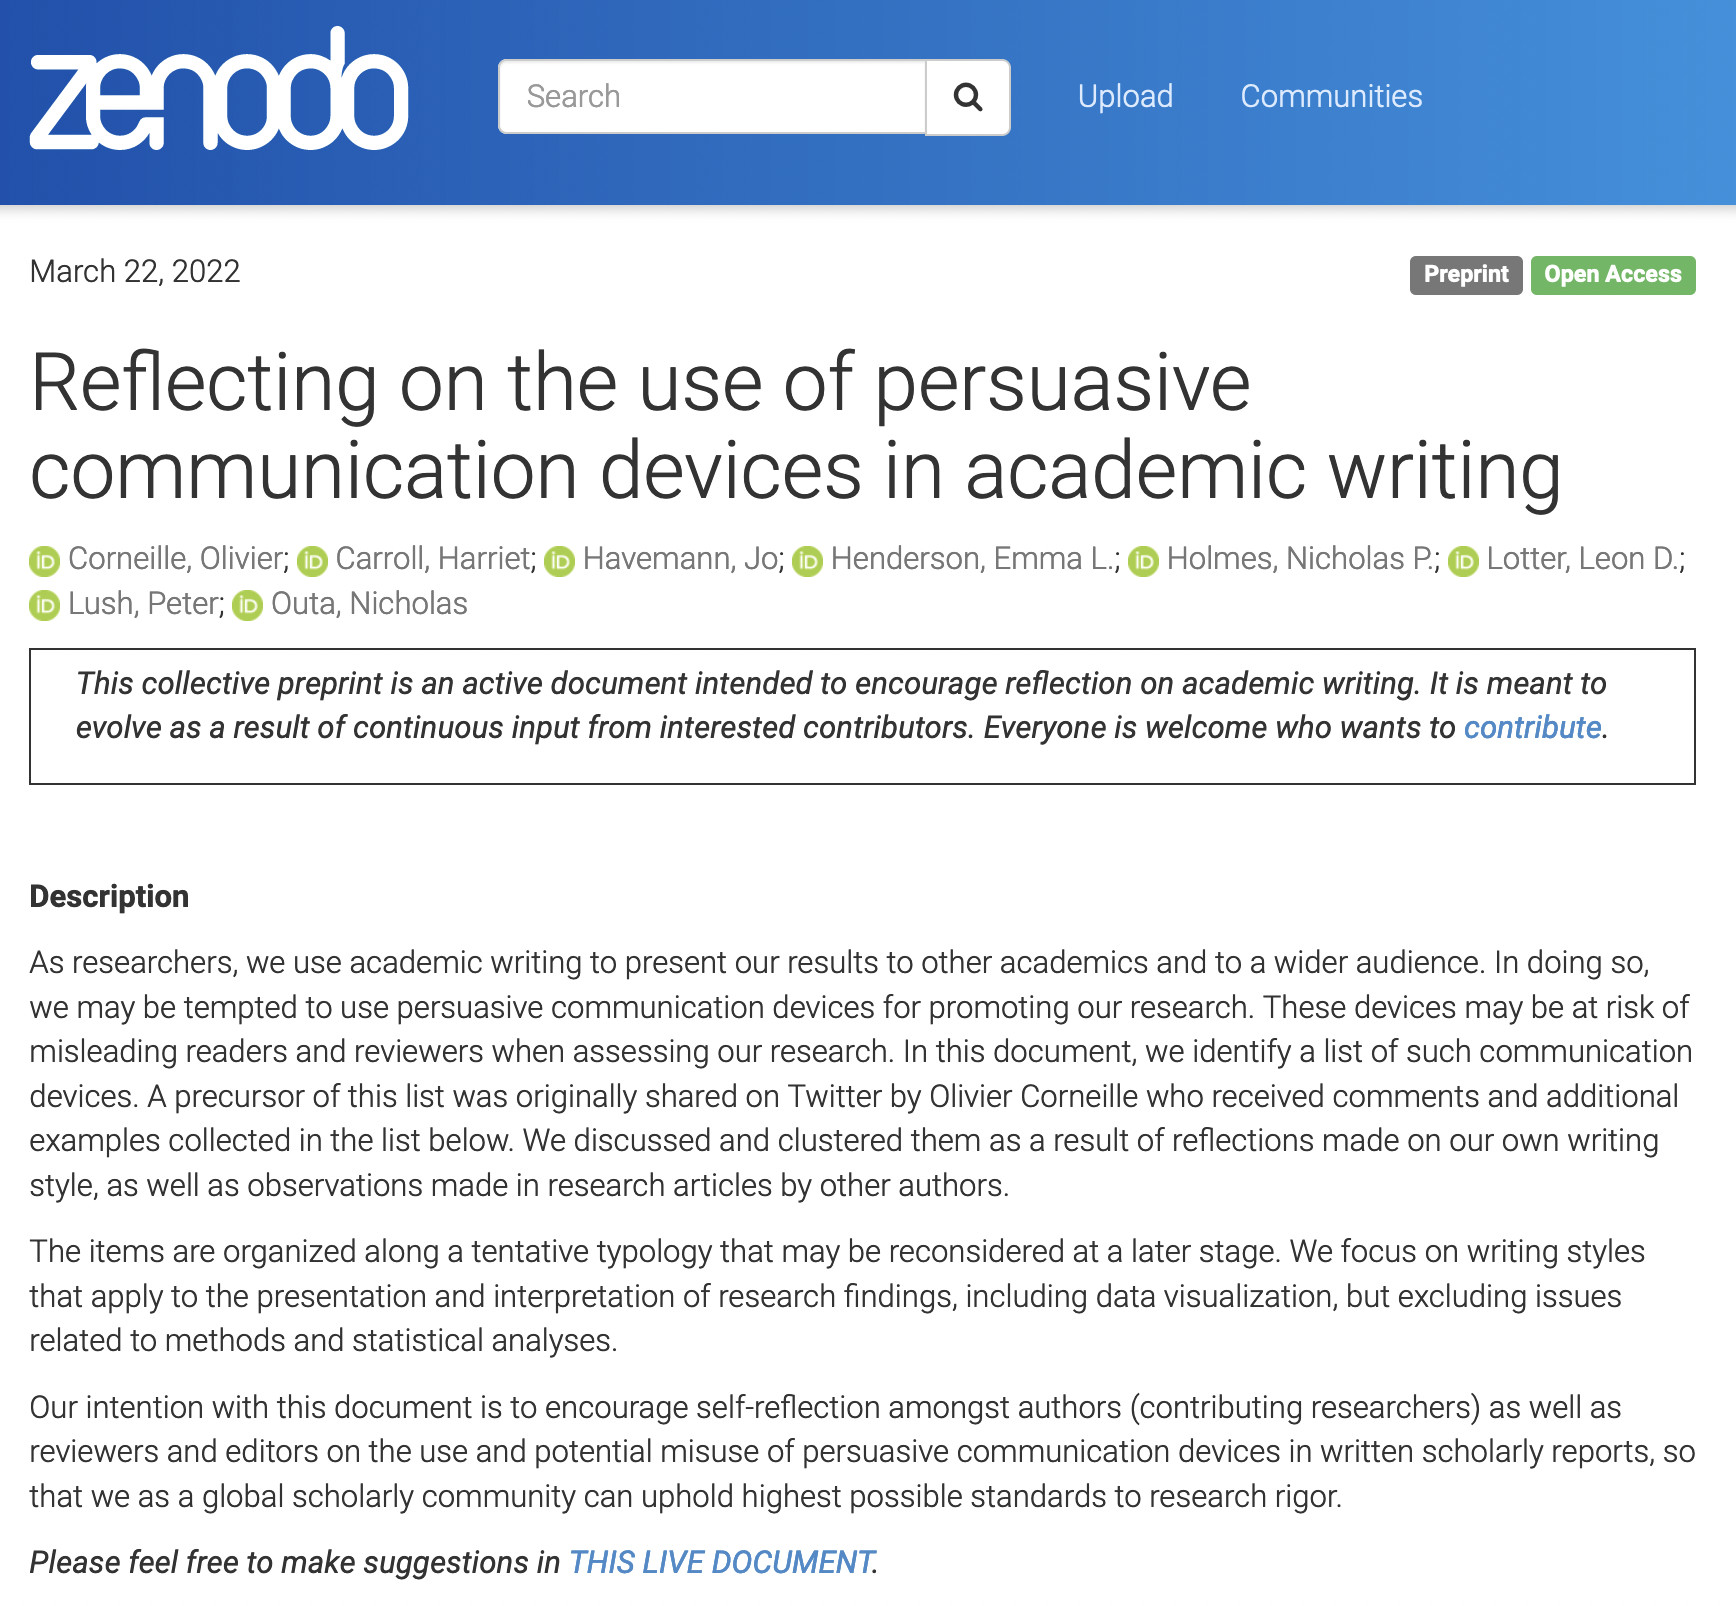 Reflecting on the use of persuasive communication devices in academic writing